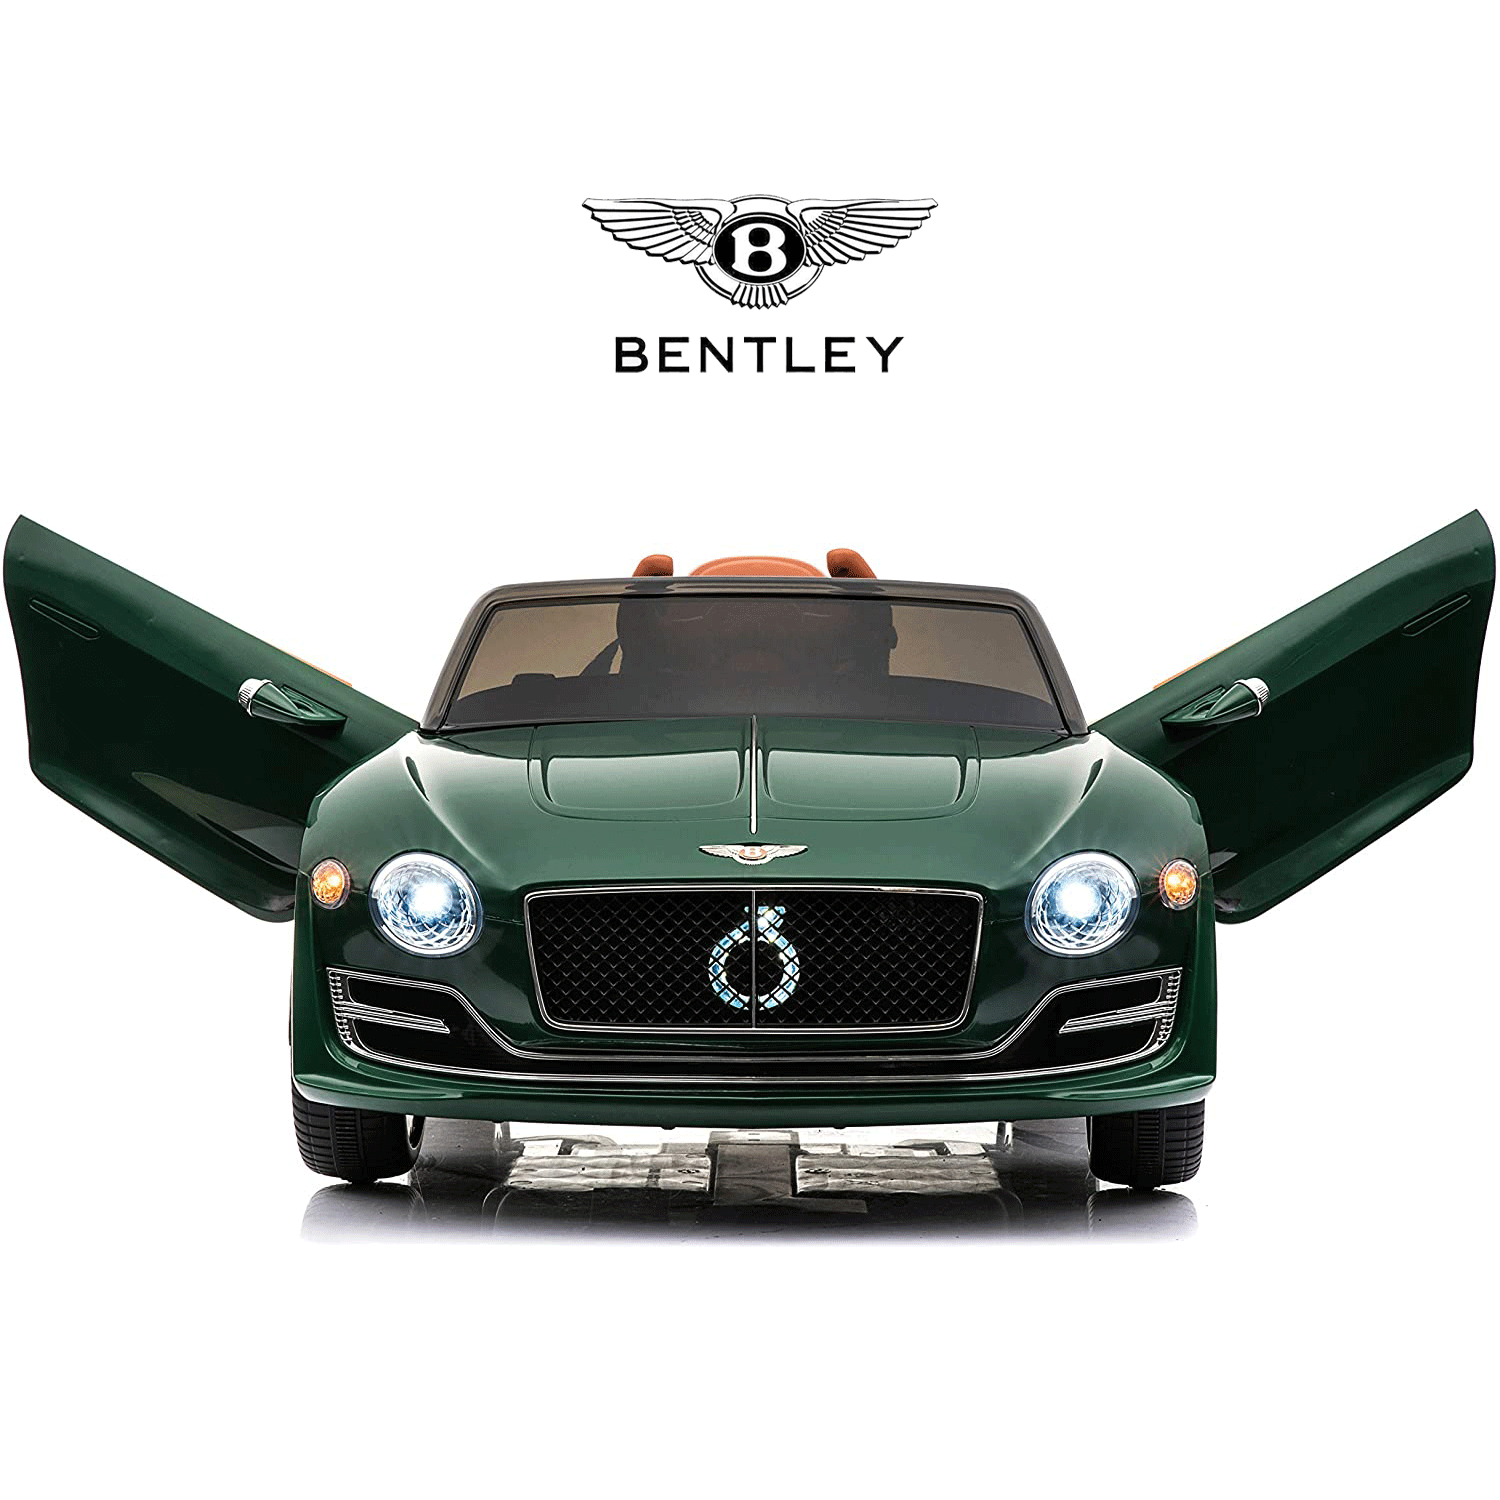 LISUEYNE Official Licensed Bentley Ride on Car,12V Electric Vehicles for Boys Girls,RC,Music,Pink